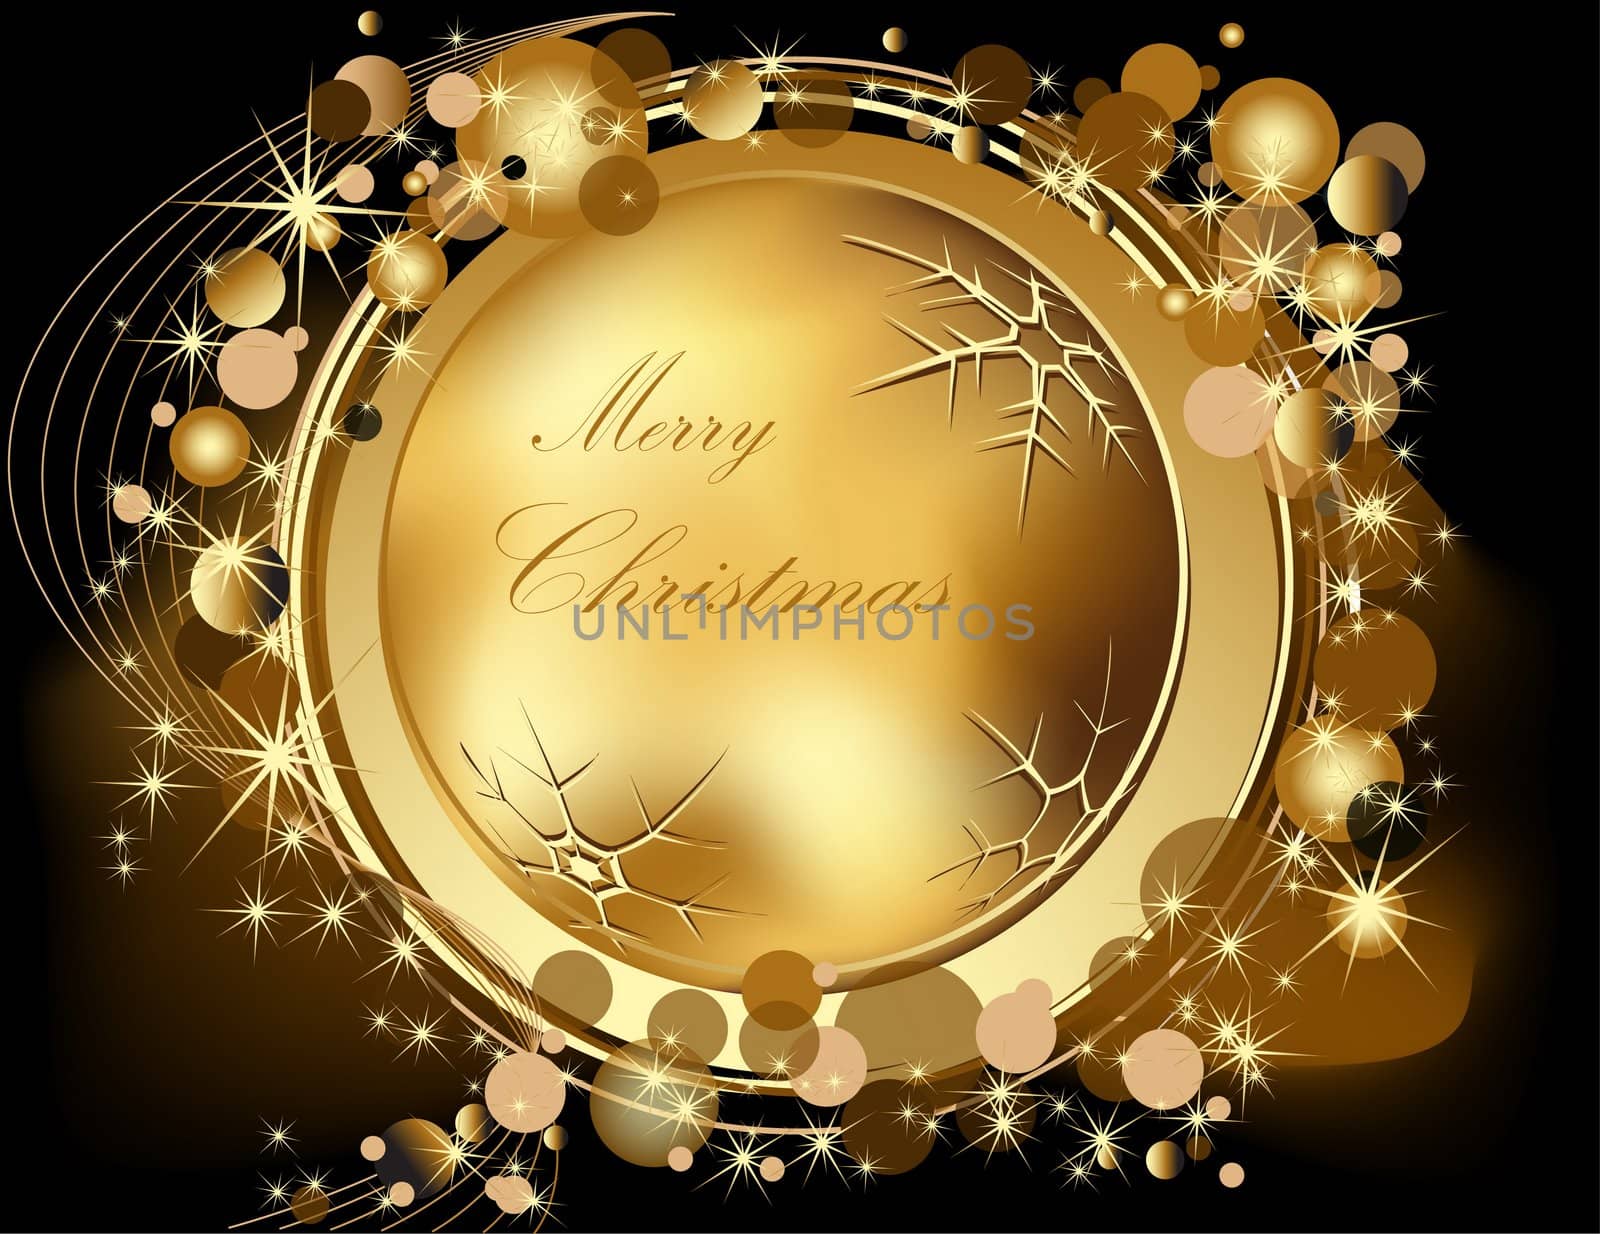 Gold Merry Christmas  background  by jelen80